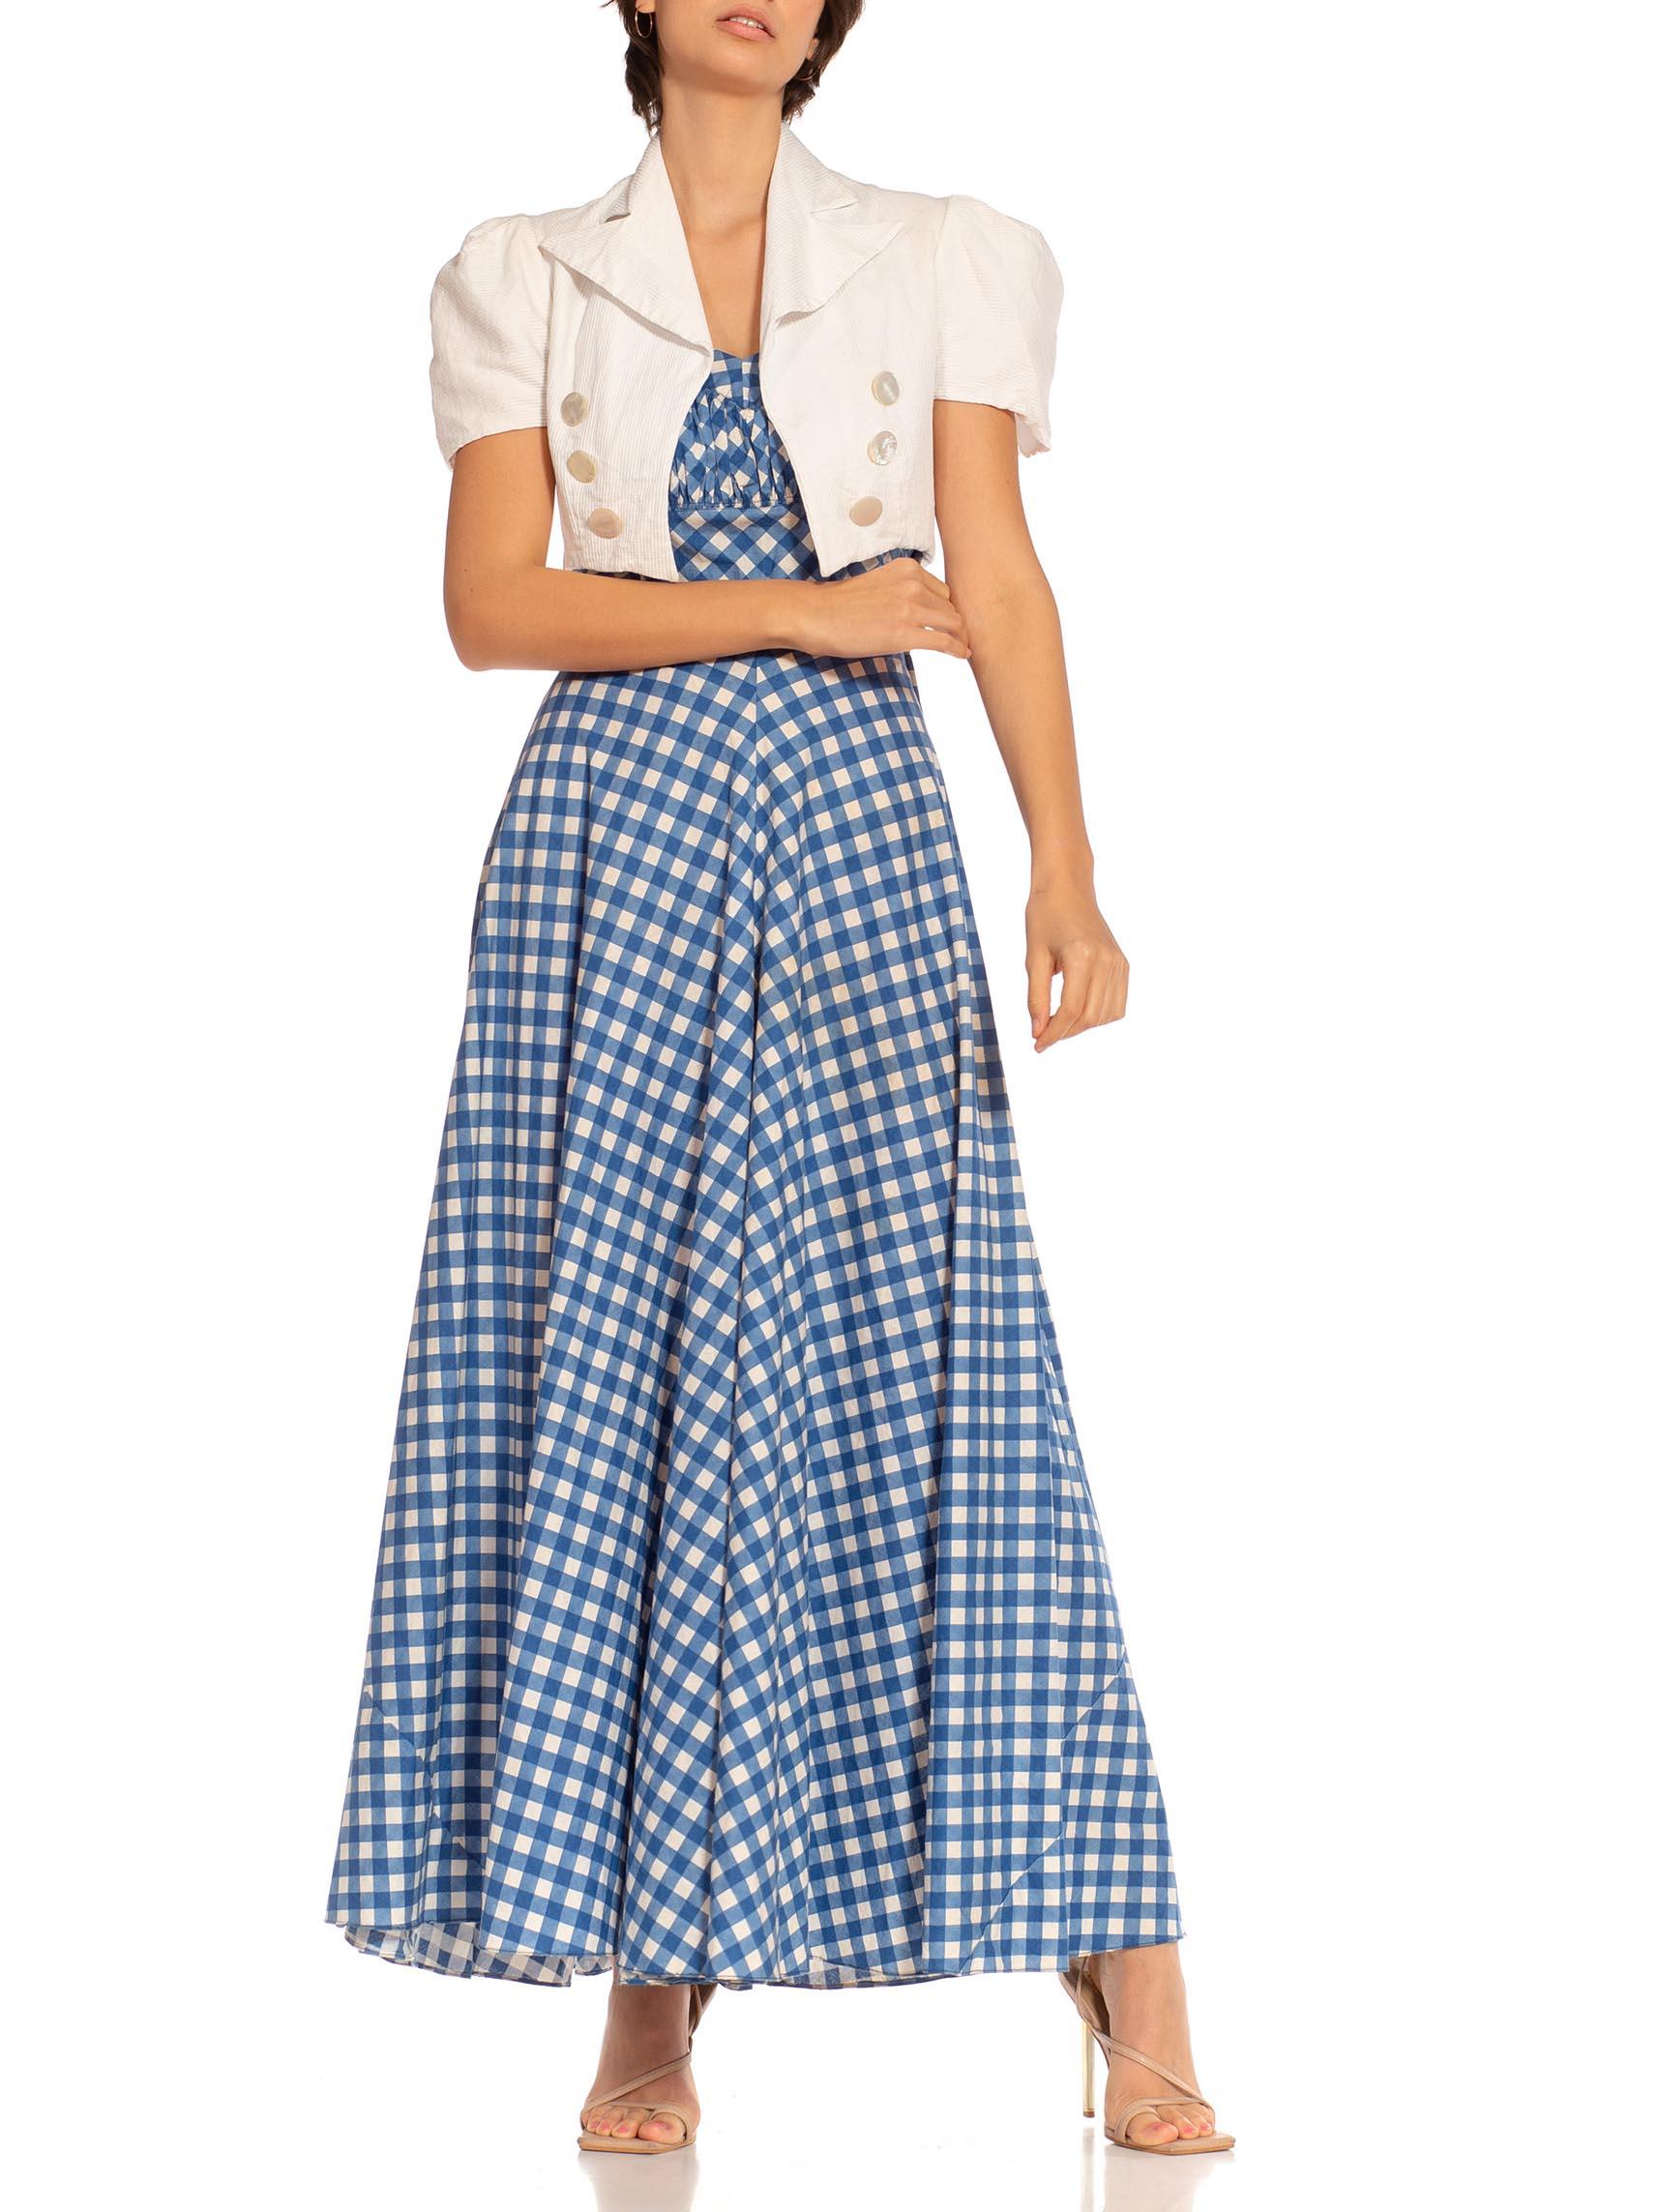 Women's 1930S White & Blue Cotton Gingham Full Skirt Dress With Matching Jacket Deadsto For Sale